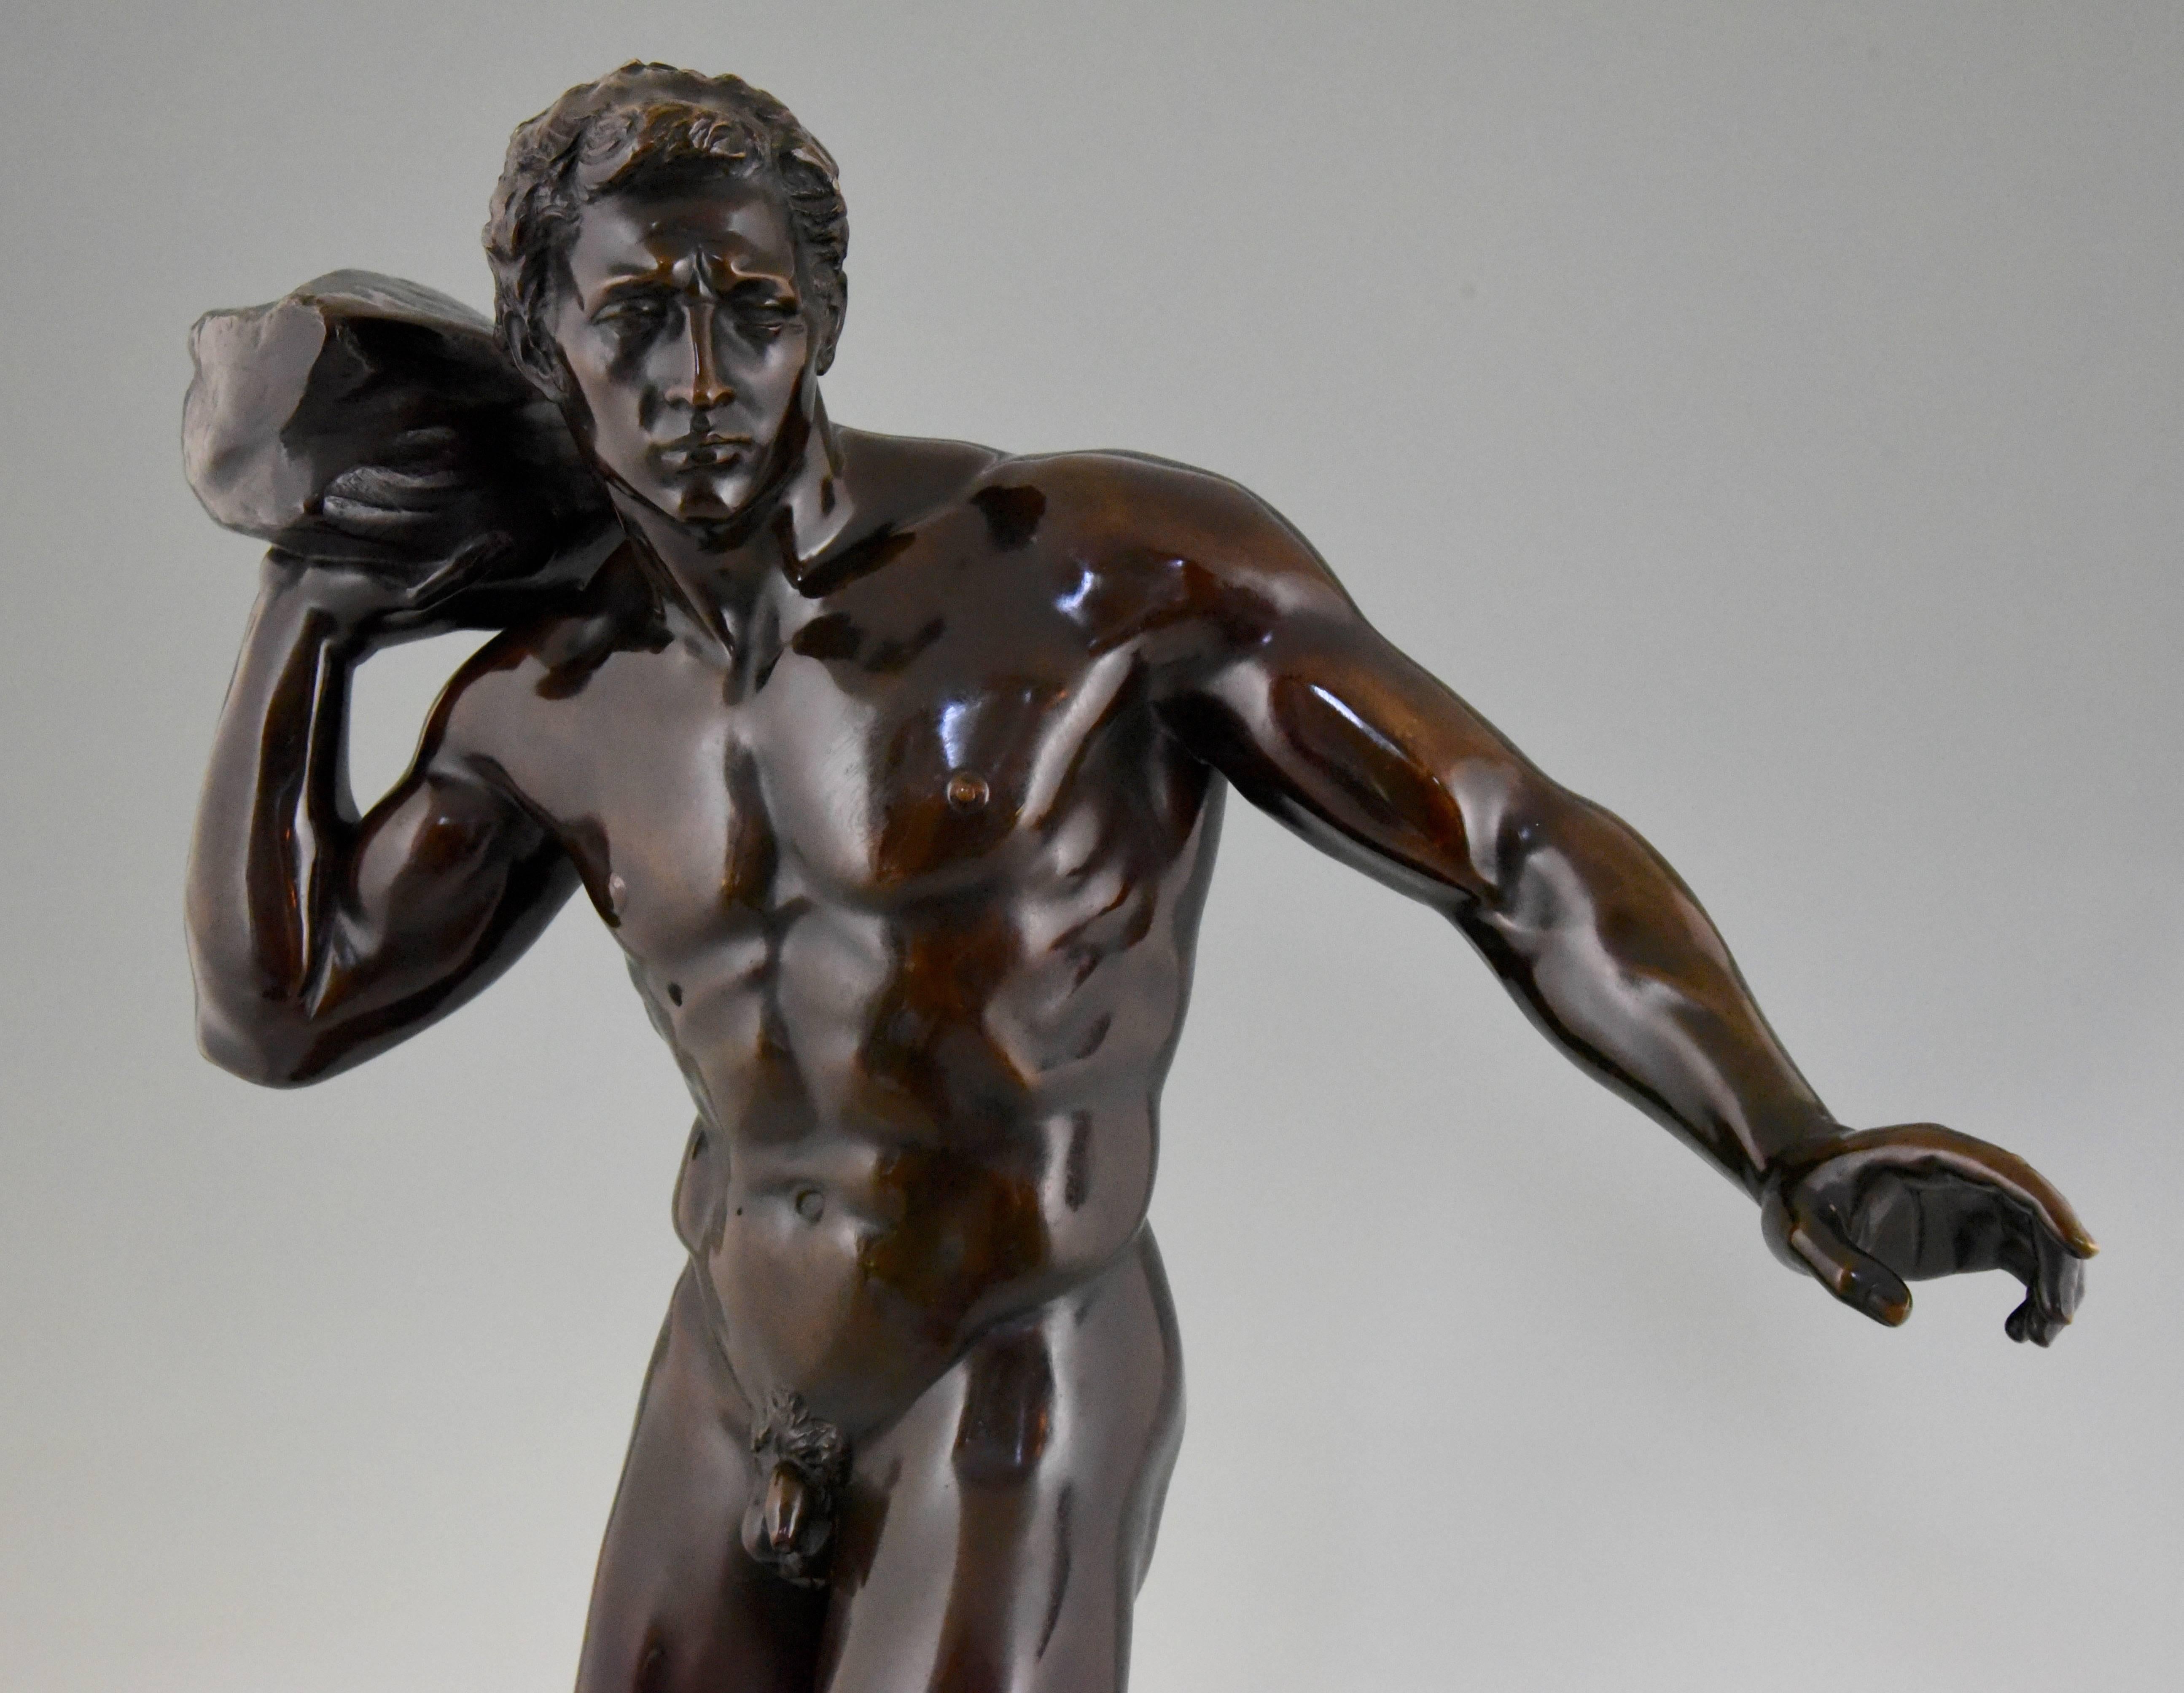 Romantic Antique Sculpture of a Male Nude Athlete Georg Kemper H. 34 inch Germany, 1900